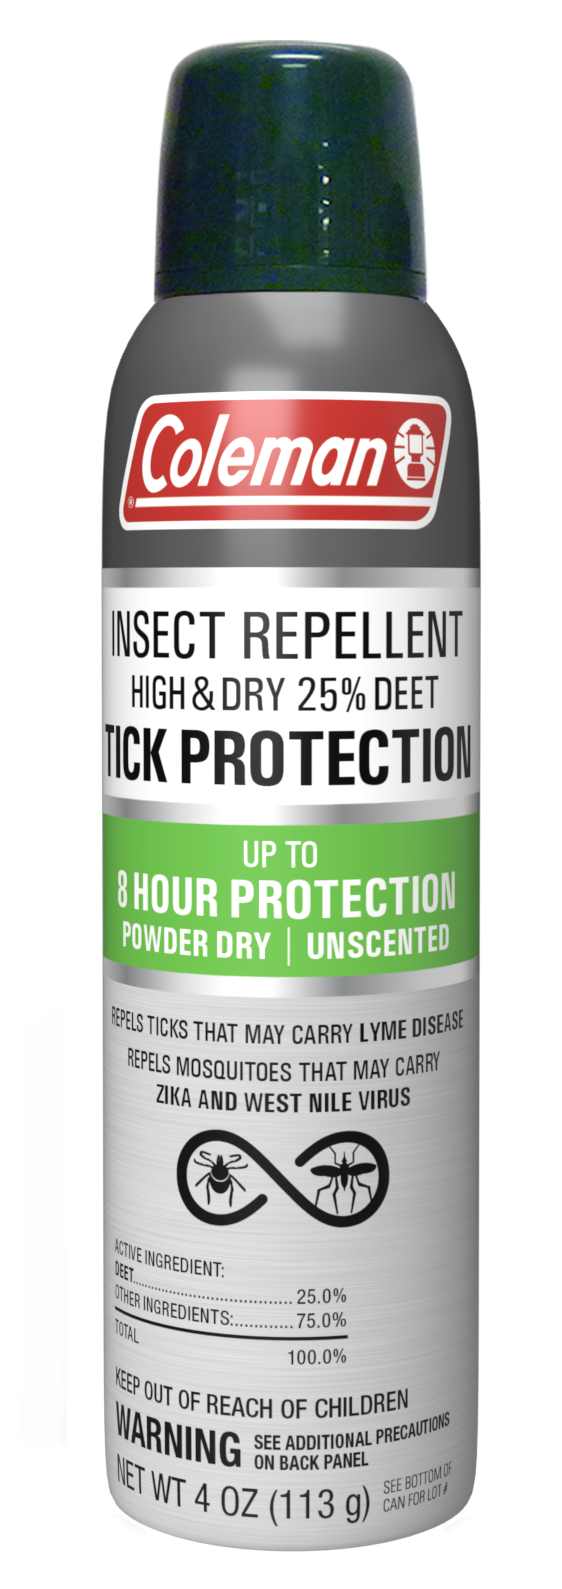 tick protection